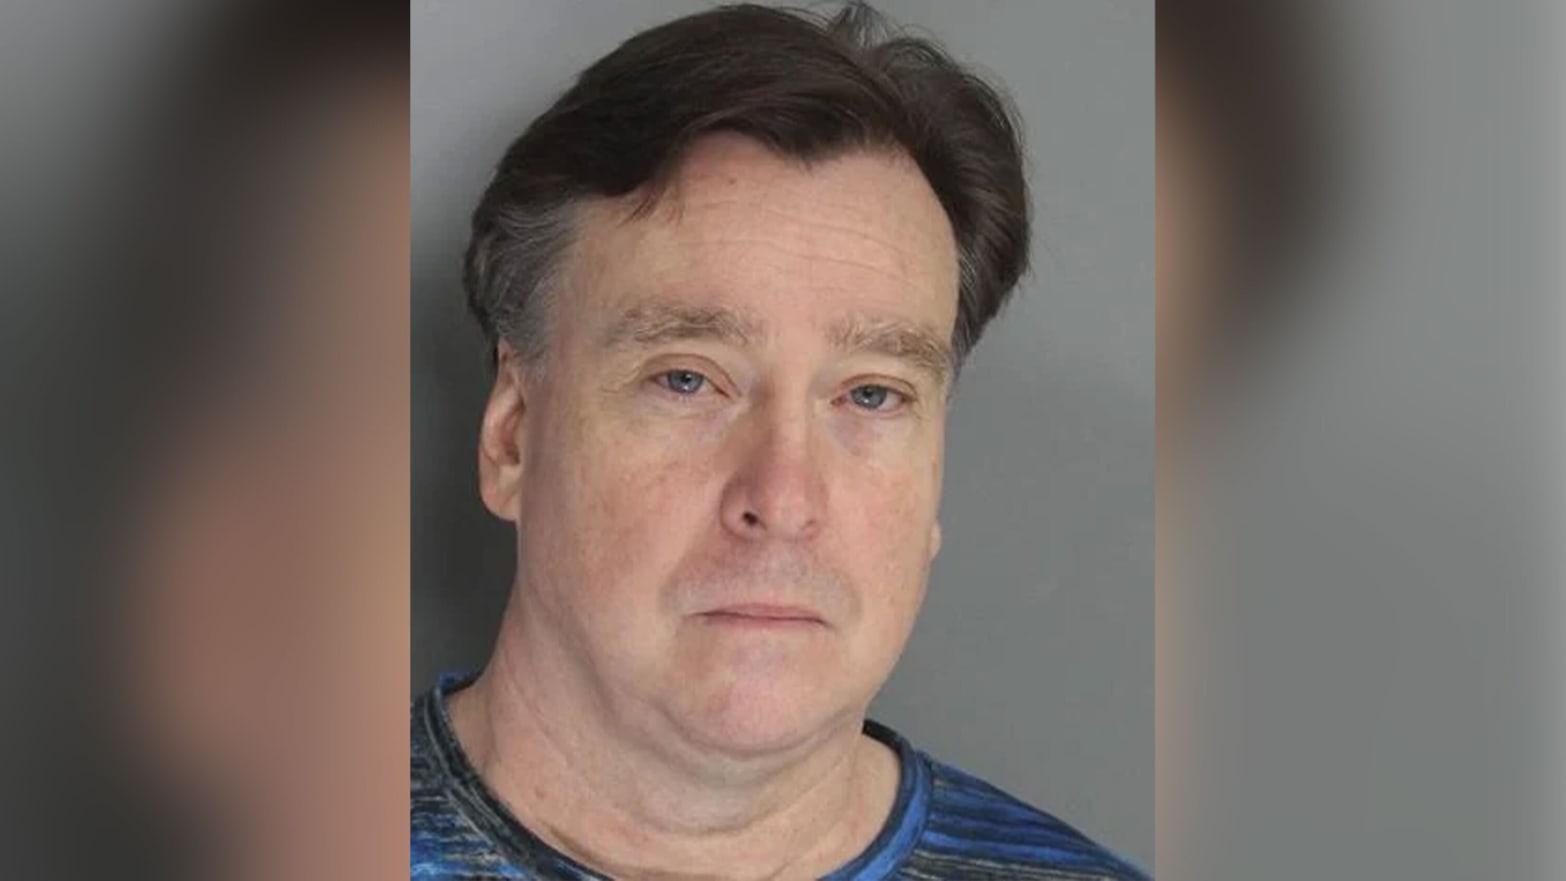 Christopher Link Jones, 55, was arrested late last month in Aiken, South Carolina for alleged sexual abuse of a child.